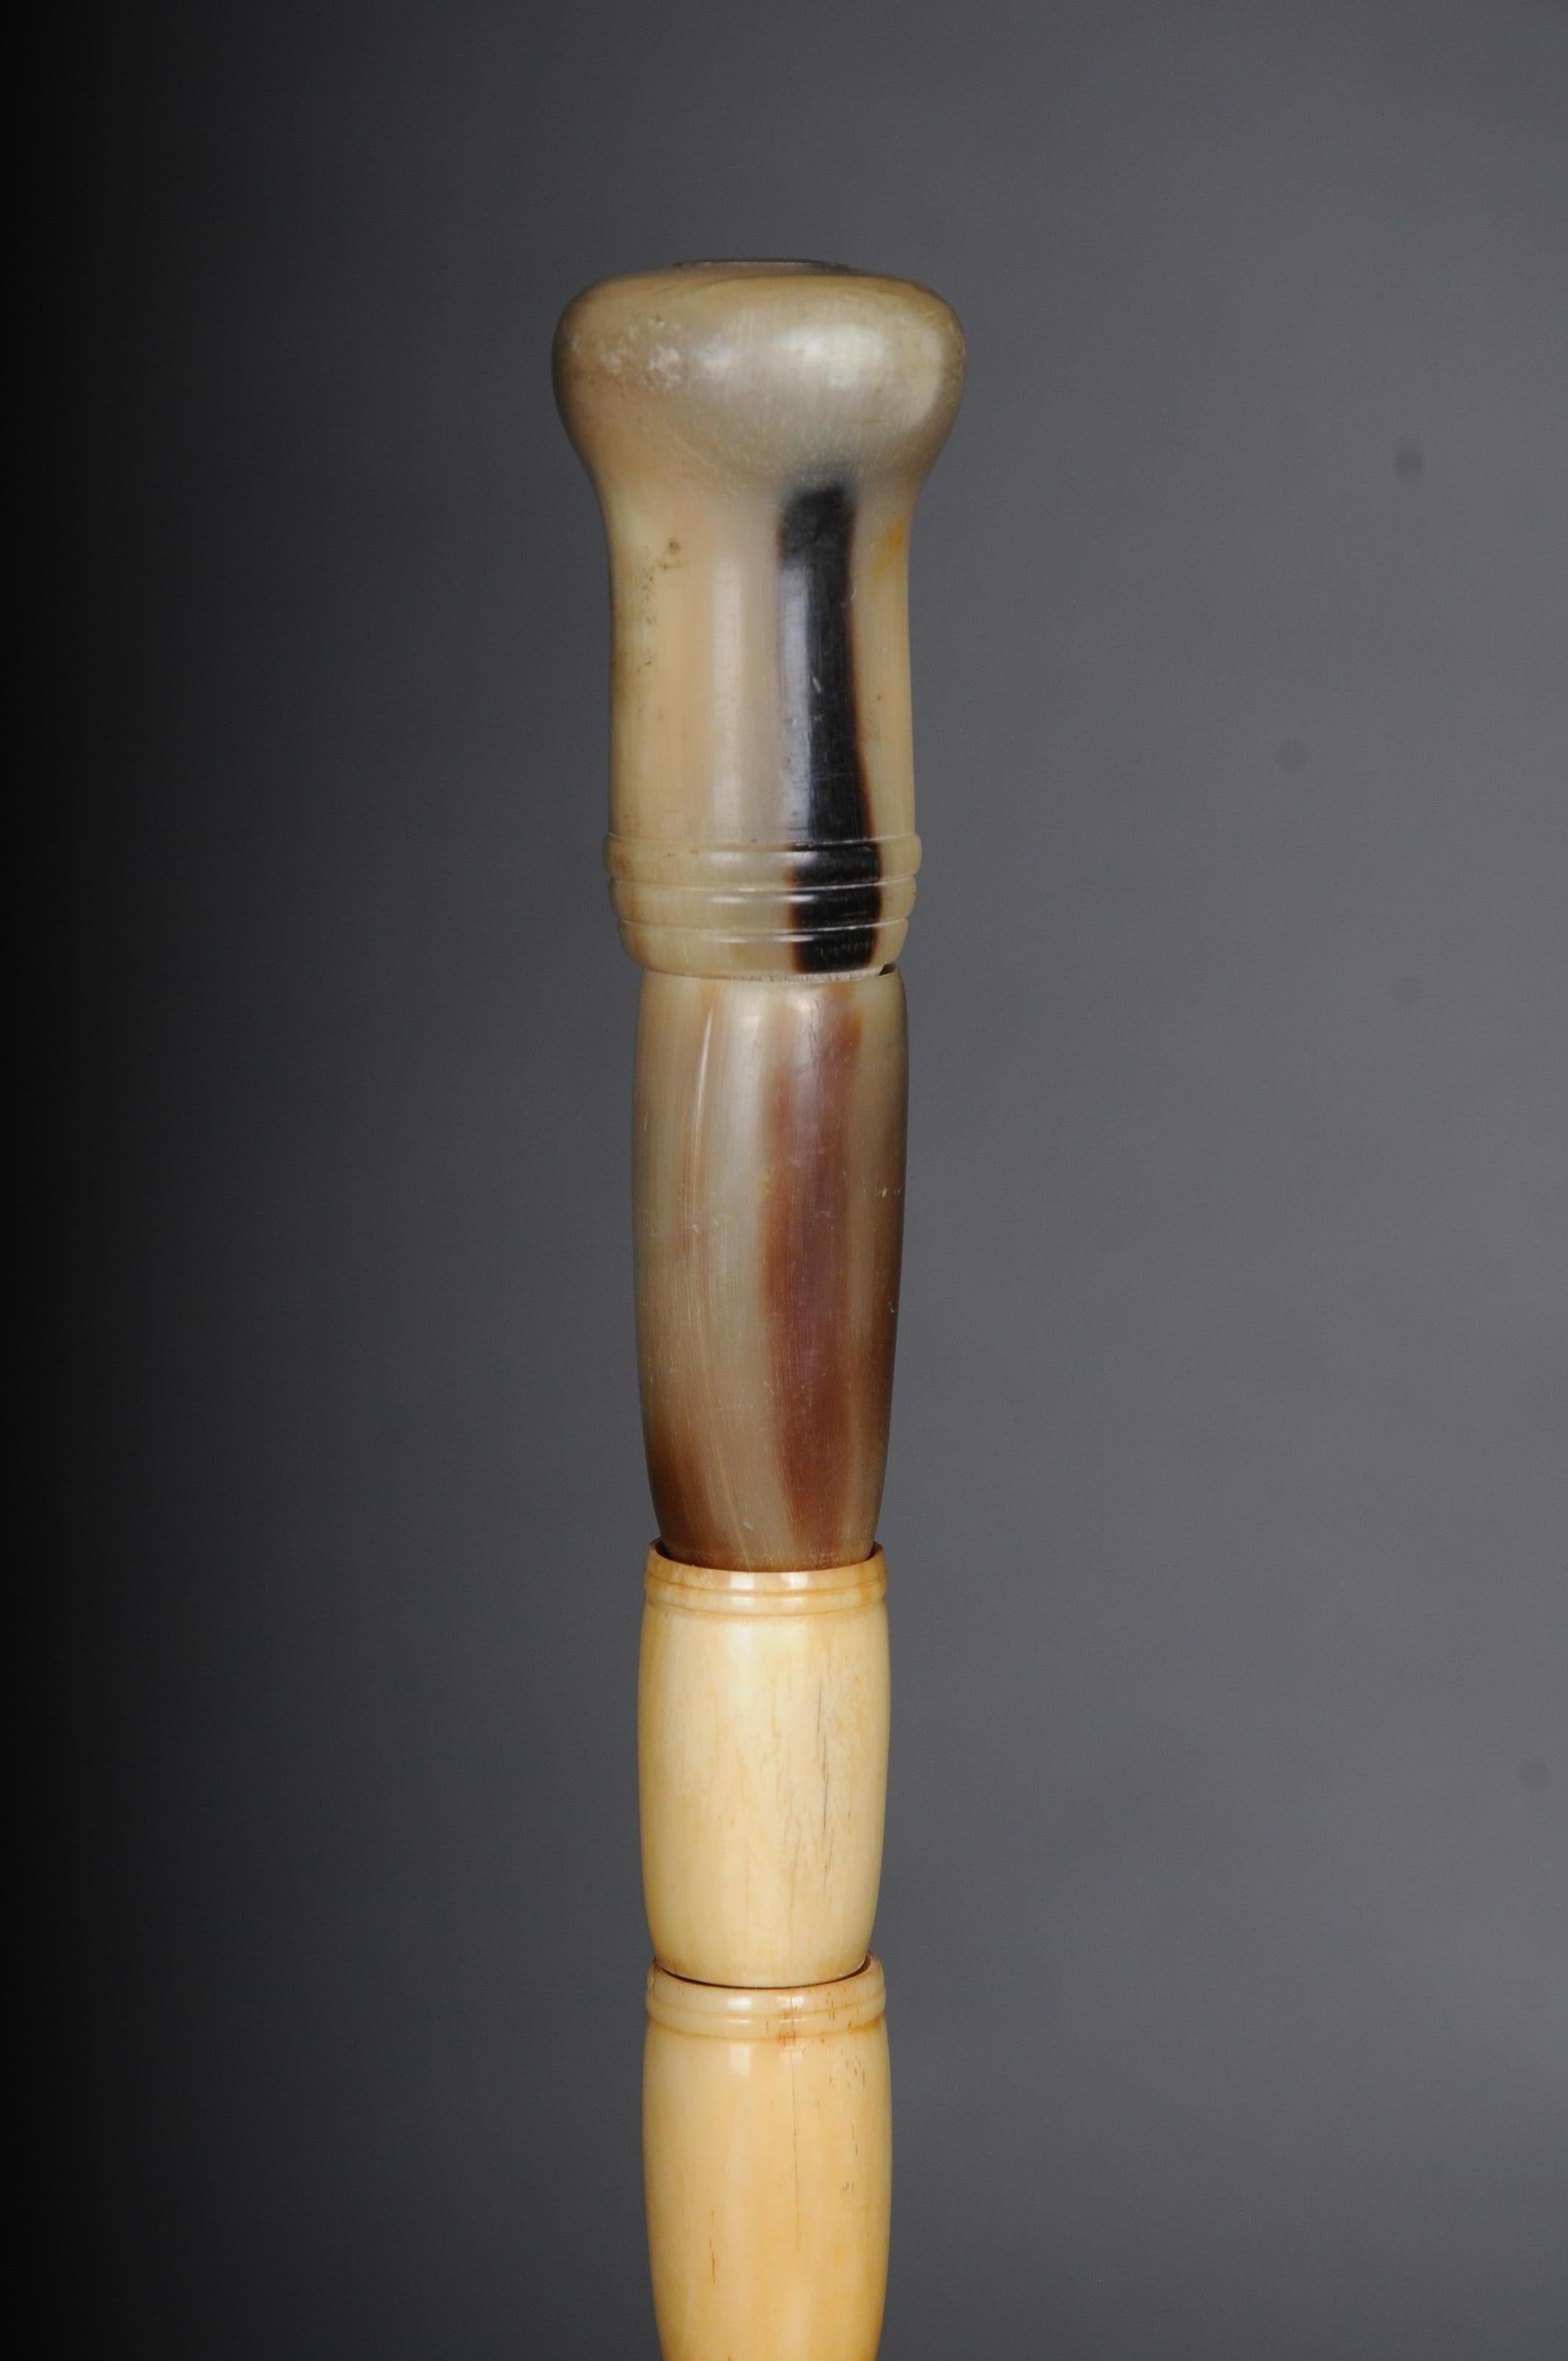 Unique walking stick / strolling stick 19th century, bone

Antique walking stick made of bone, circa 1900

Solid bone :-). Unique shape with several unusually stacked nozzle shafts. The handle and the end of the stick are made of horn.
Very